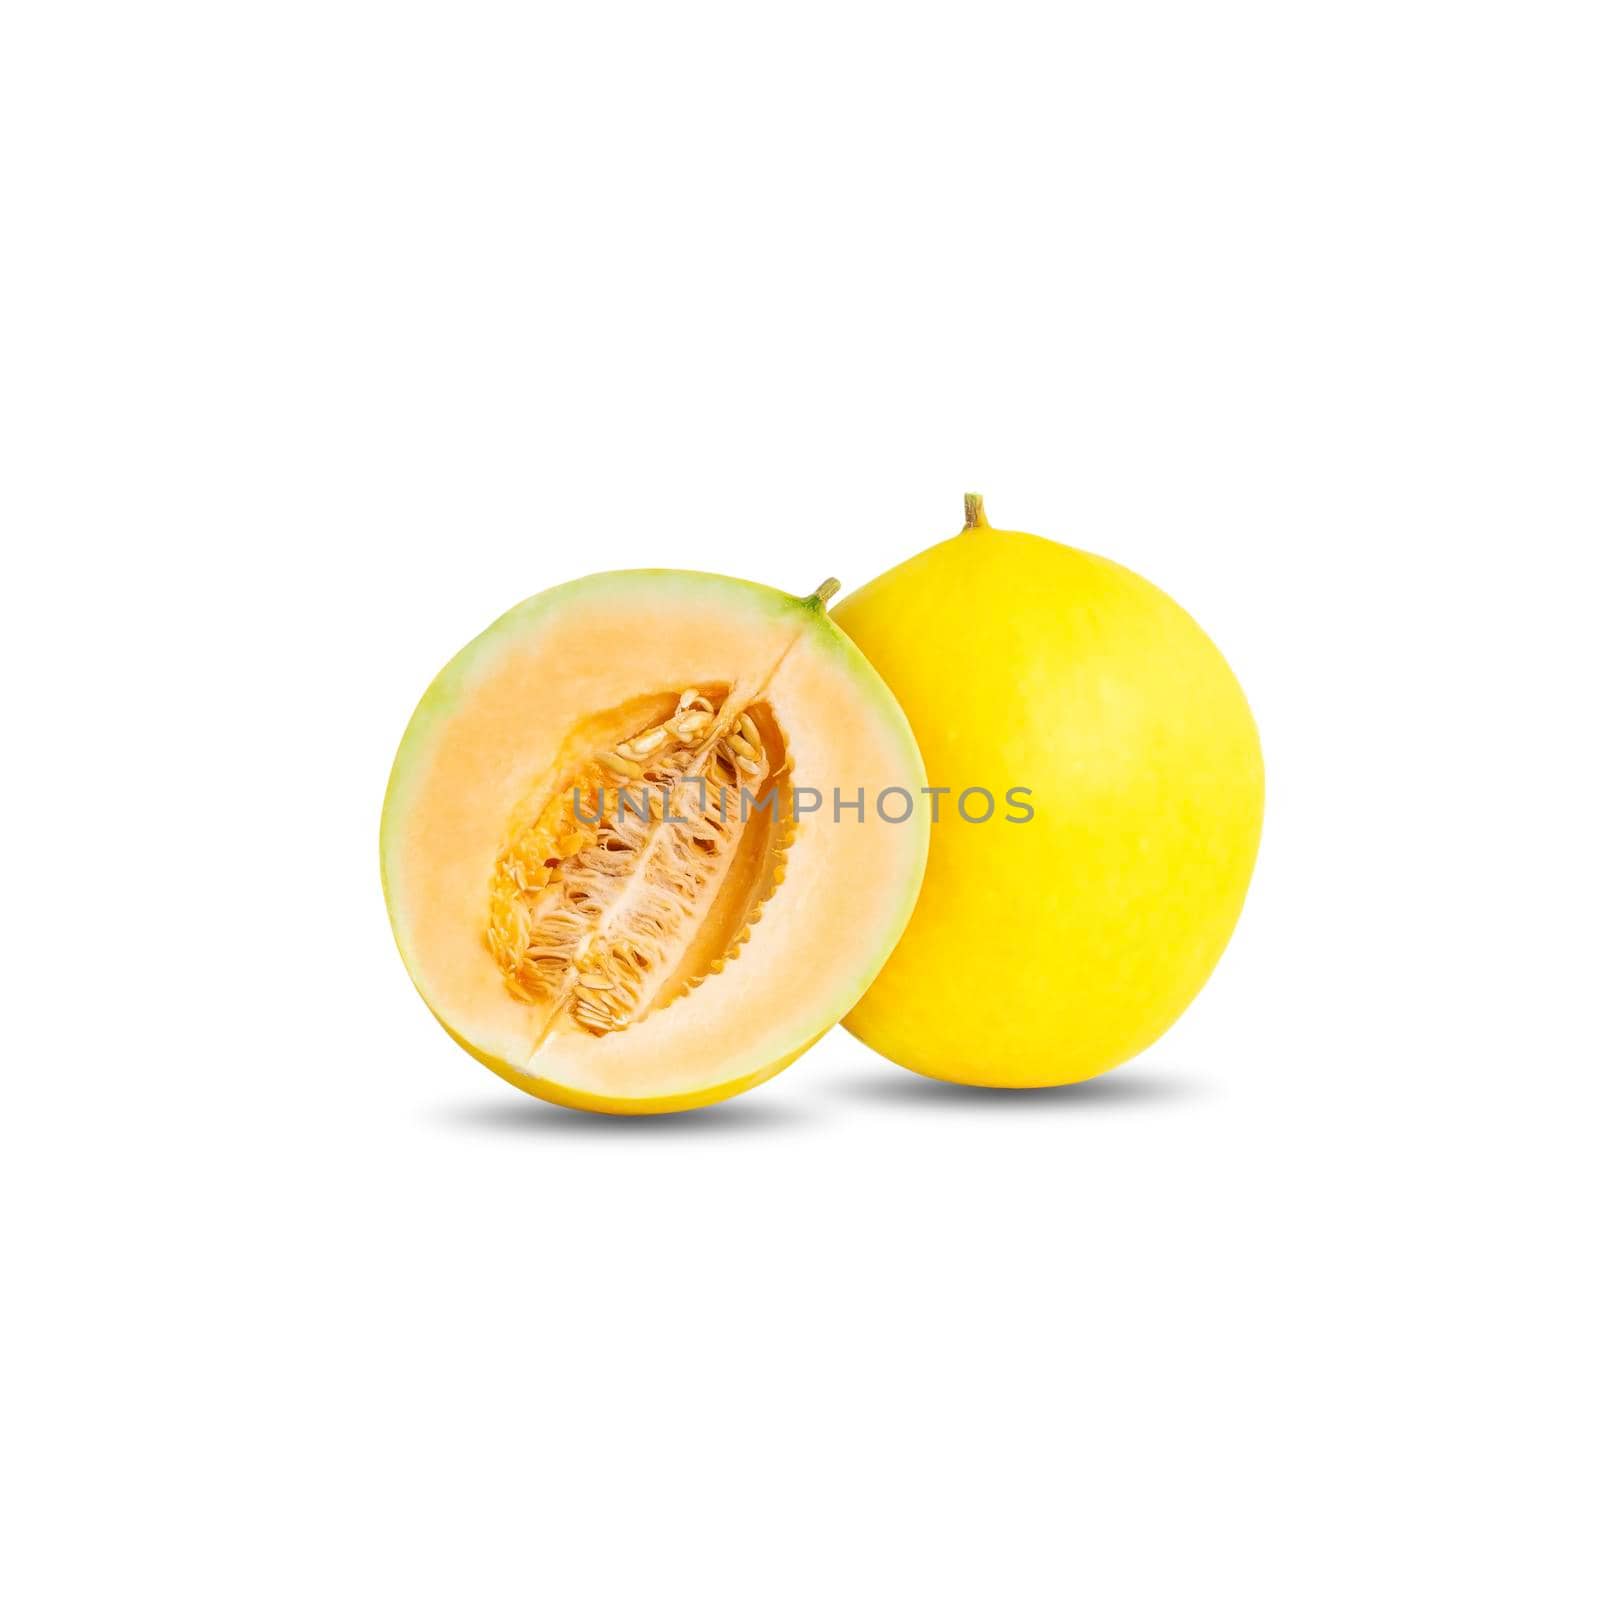 One cantaloupe or melon yellow color and a half piece isolated on white background